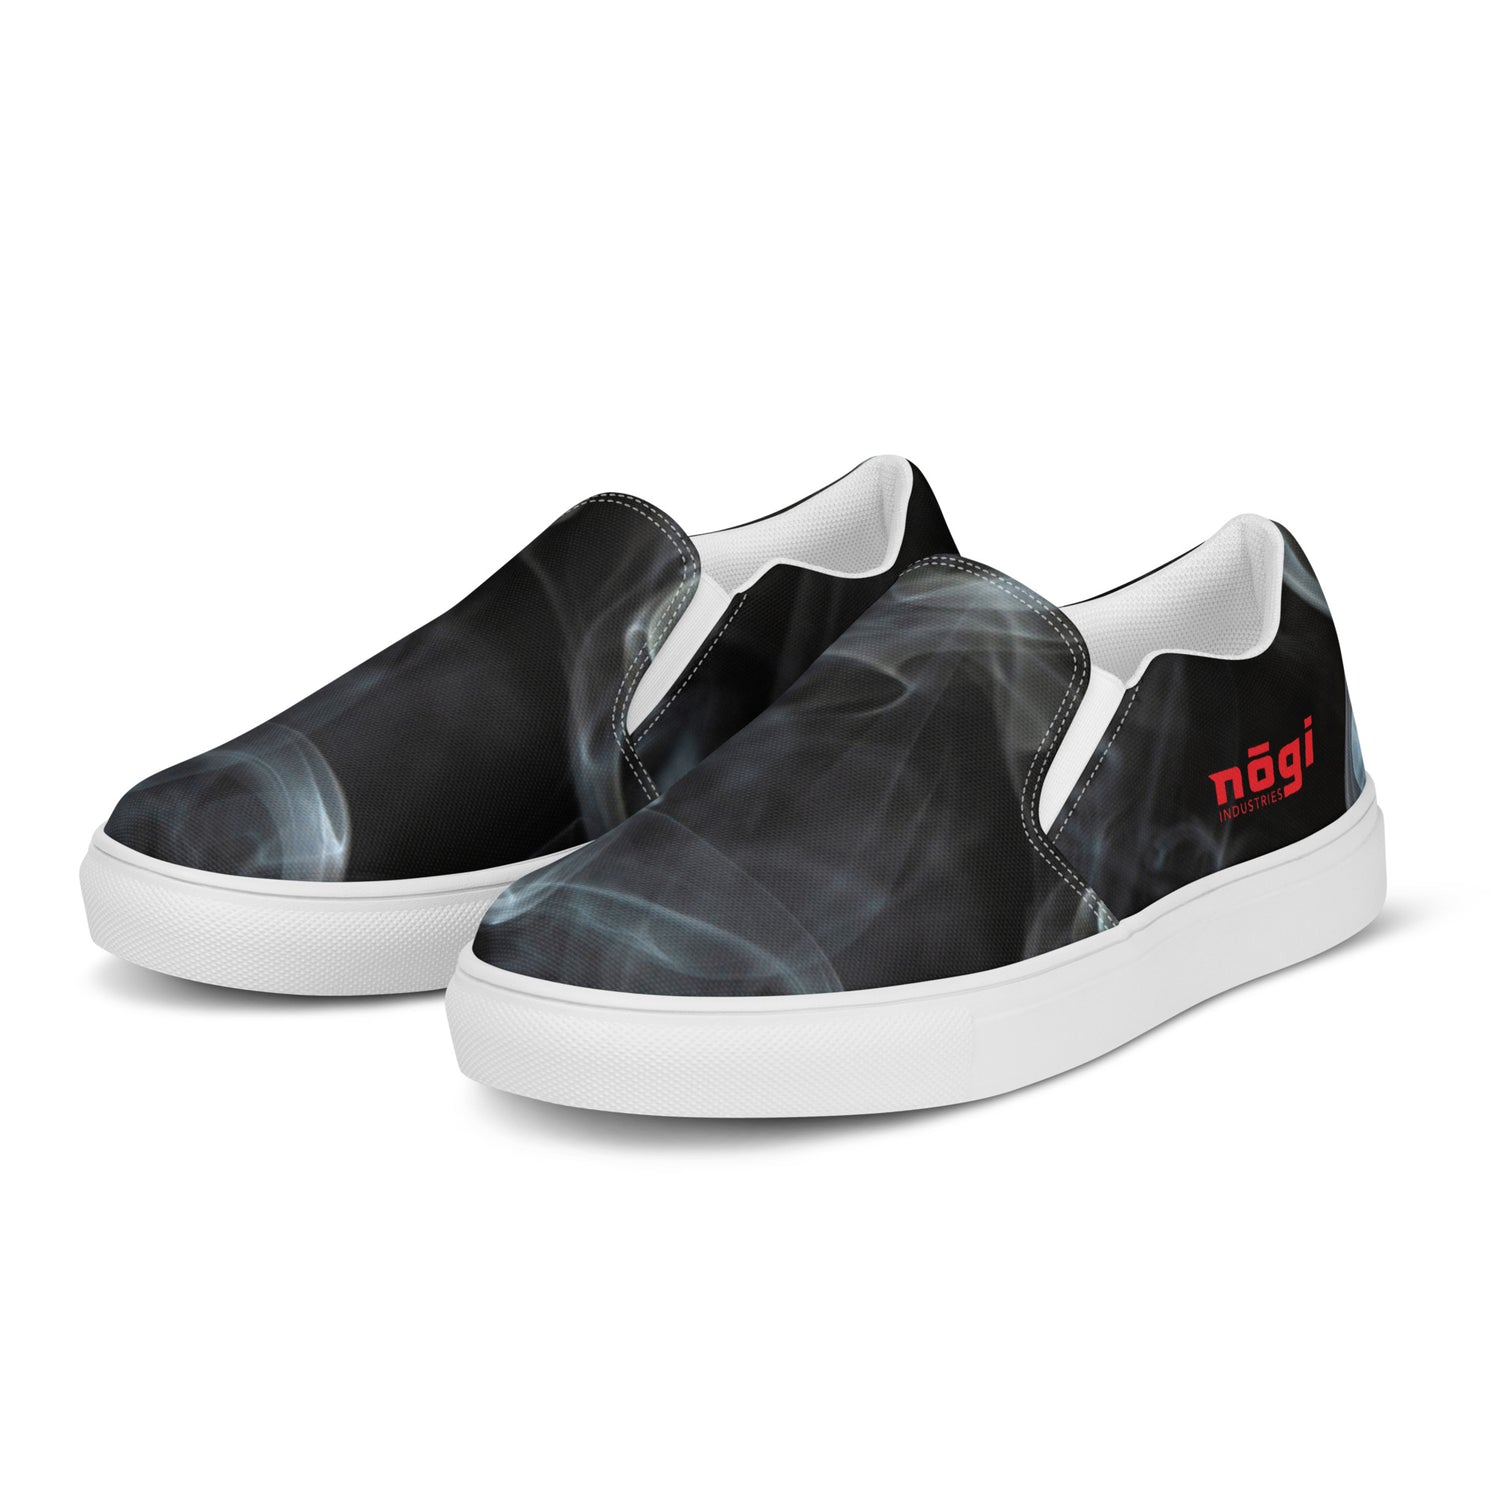 Black Smoke Men’s Slip-on Canvas Shoes by Nogi Industries